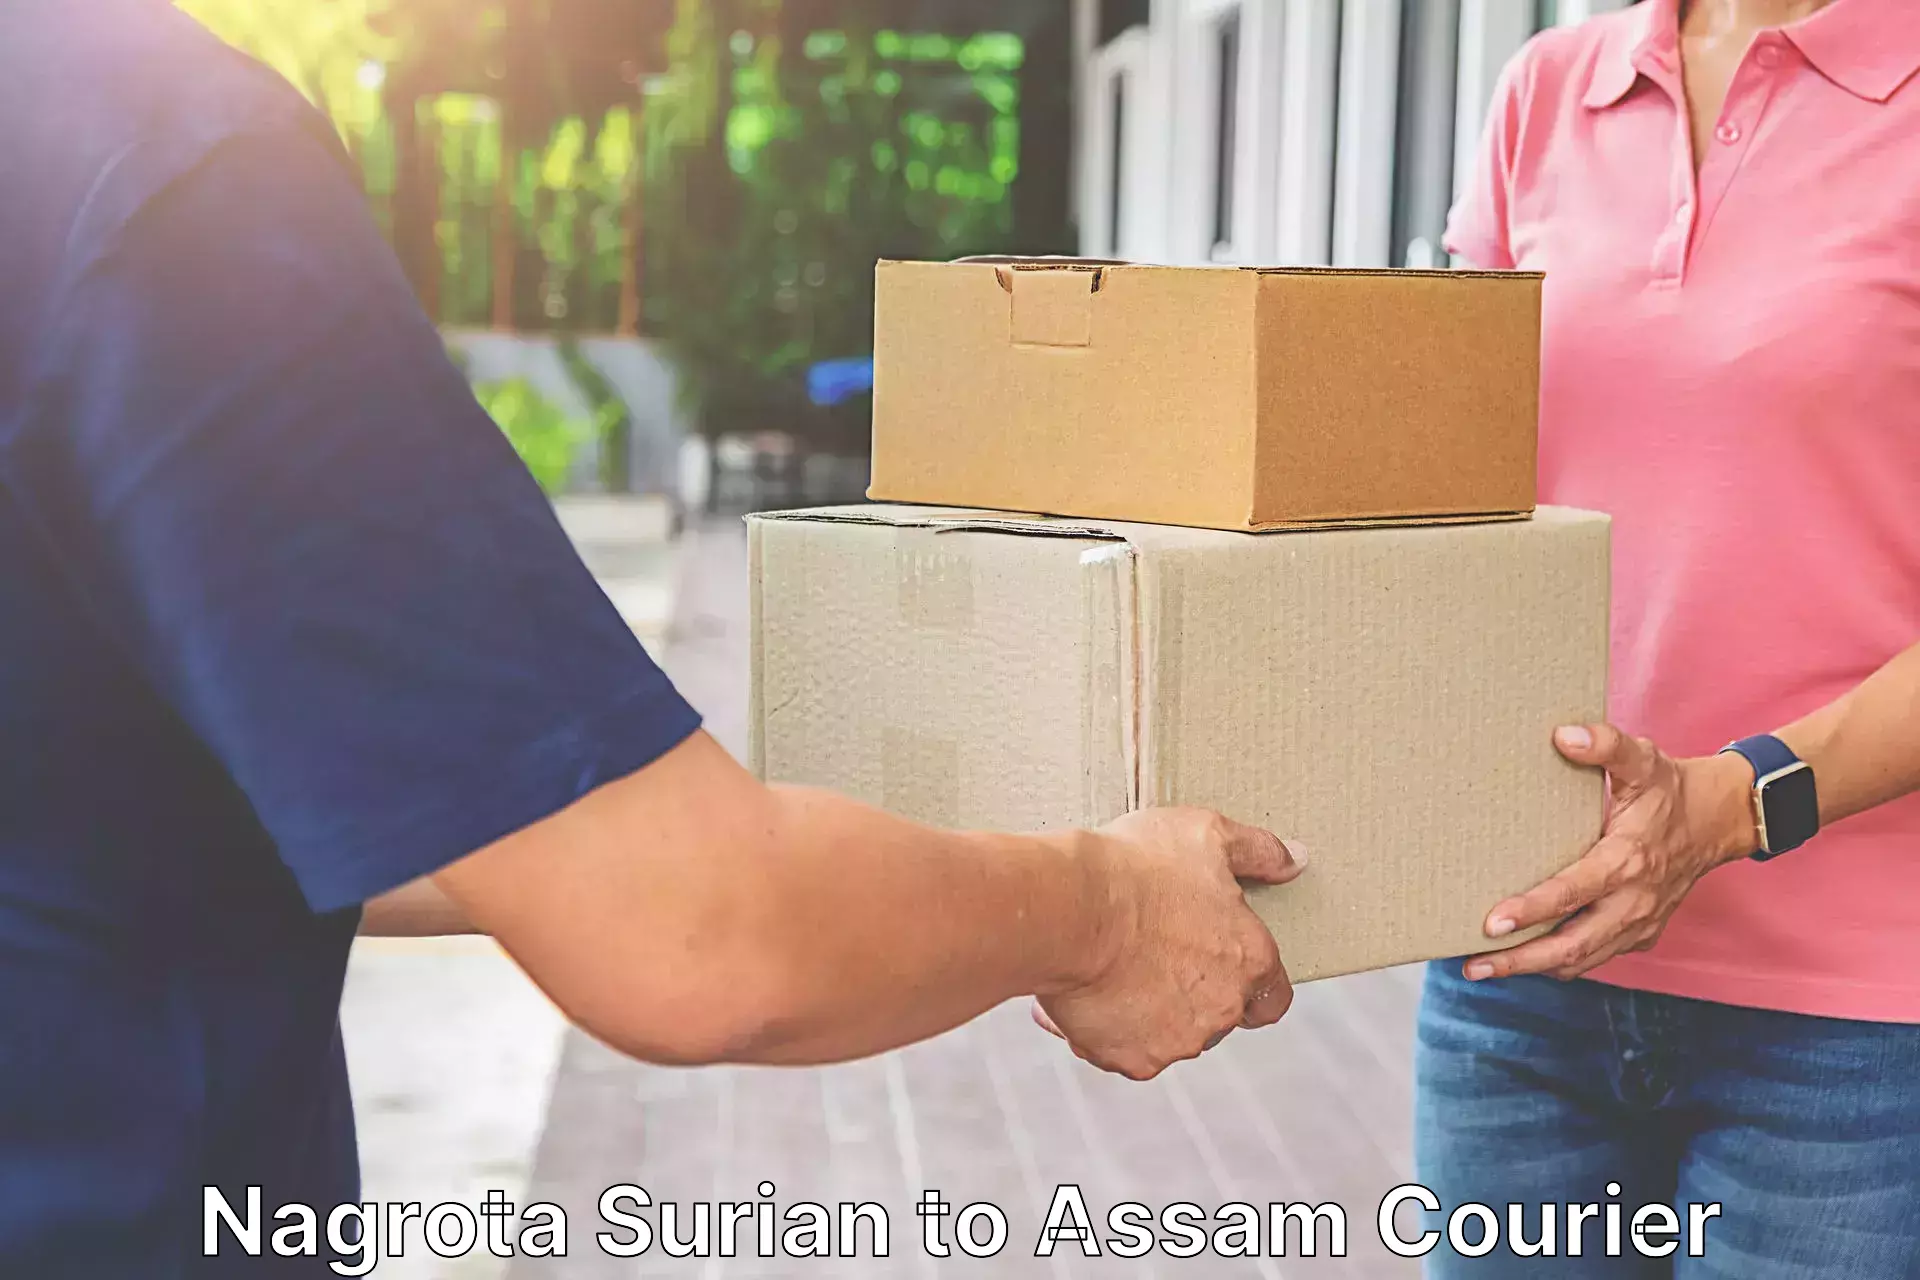 Residential courier service Nagrota Surian to Marigaon